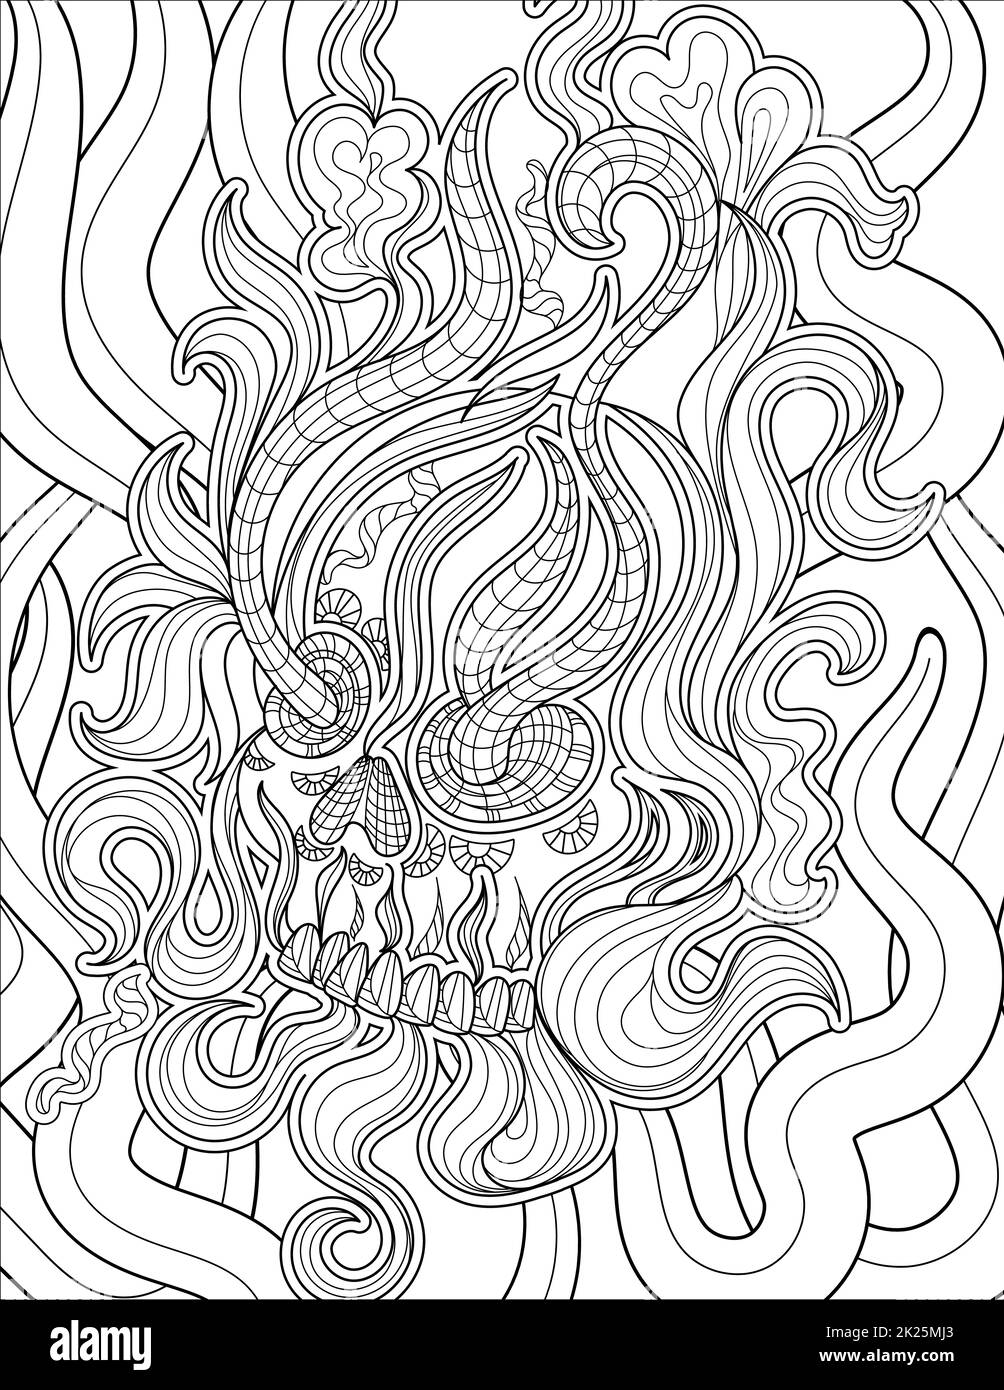 Skull Line Drawing Tattoo With Flames Coming Out From Eyes Coloring Book idea Stock Photo